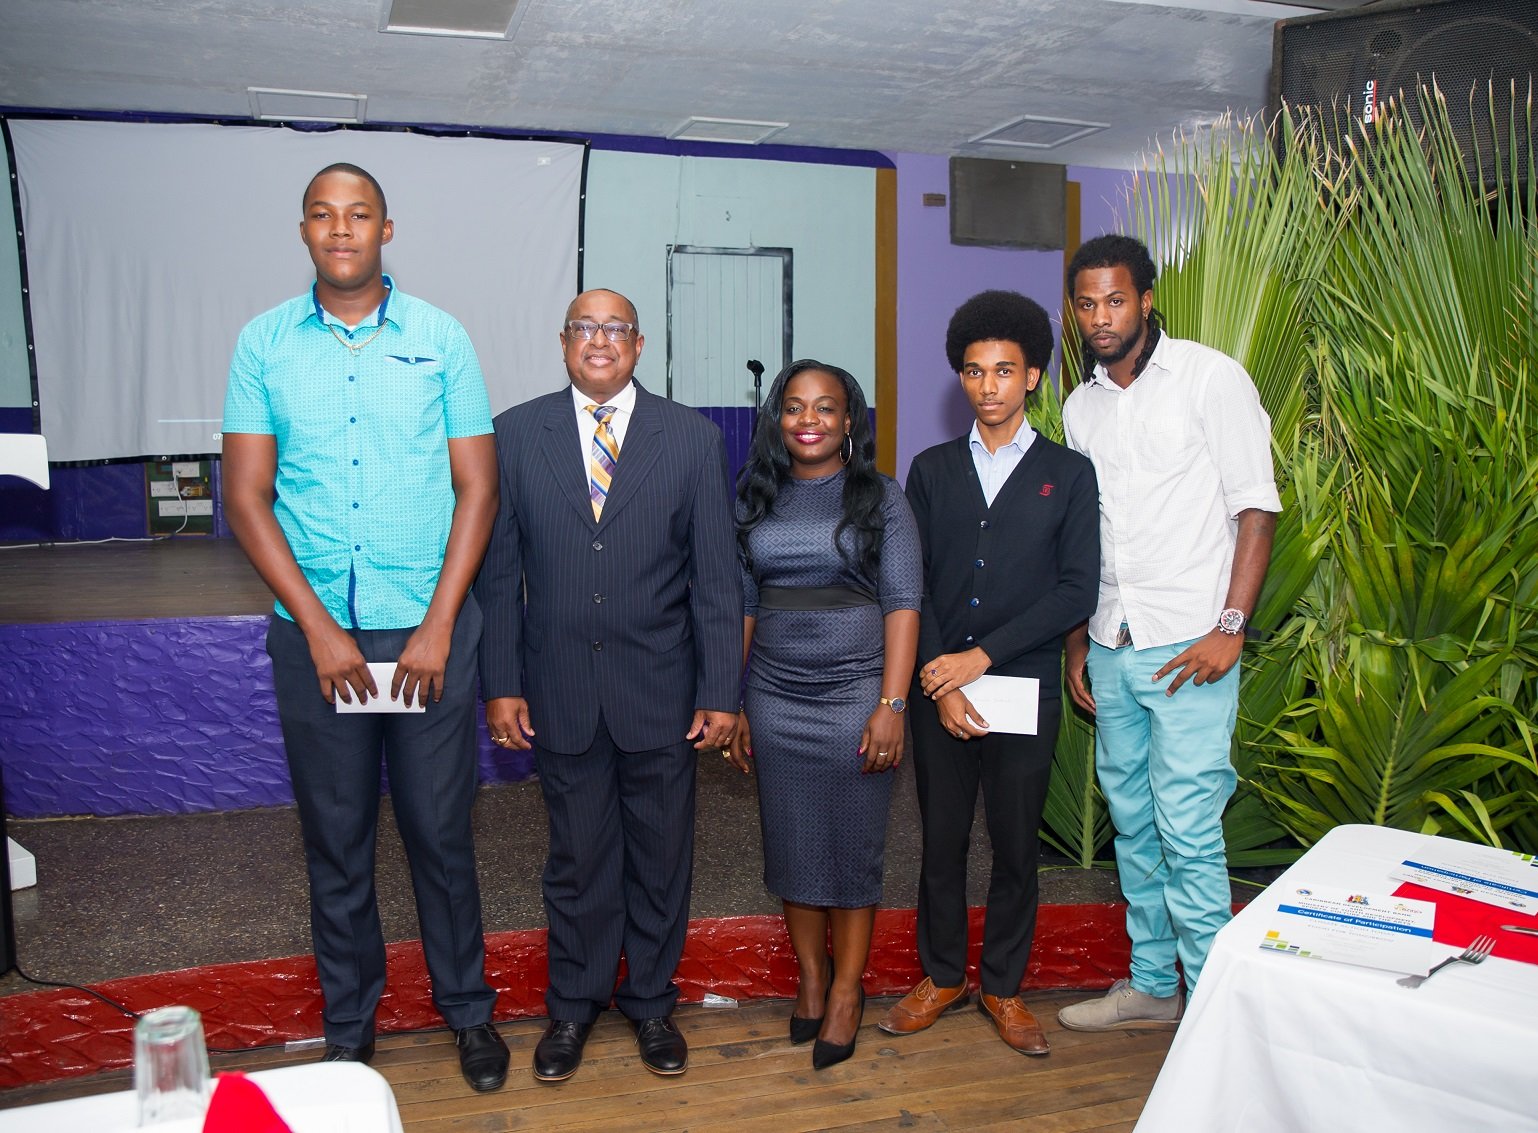 L to R: Jhavaughn Gludd, first-prize winner; Volville Forsythe, Assistant Bank Secretary, CDB; Hon. Kate Lewis, Minister within the Ministry of Youth Development, Sports, Culture and the Arts; Brandon Brathwaite, second-prize winner and Lyndon Pope, third-prize winner at the VYBZING Closing Ceremony.